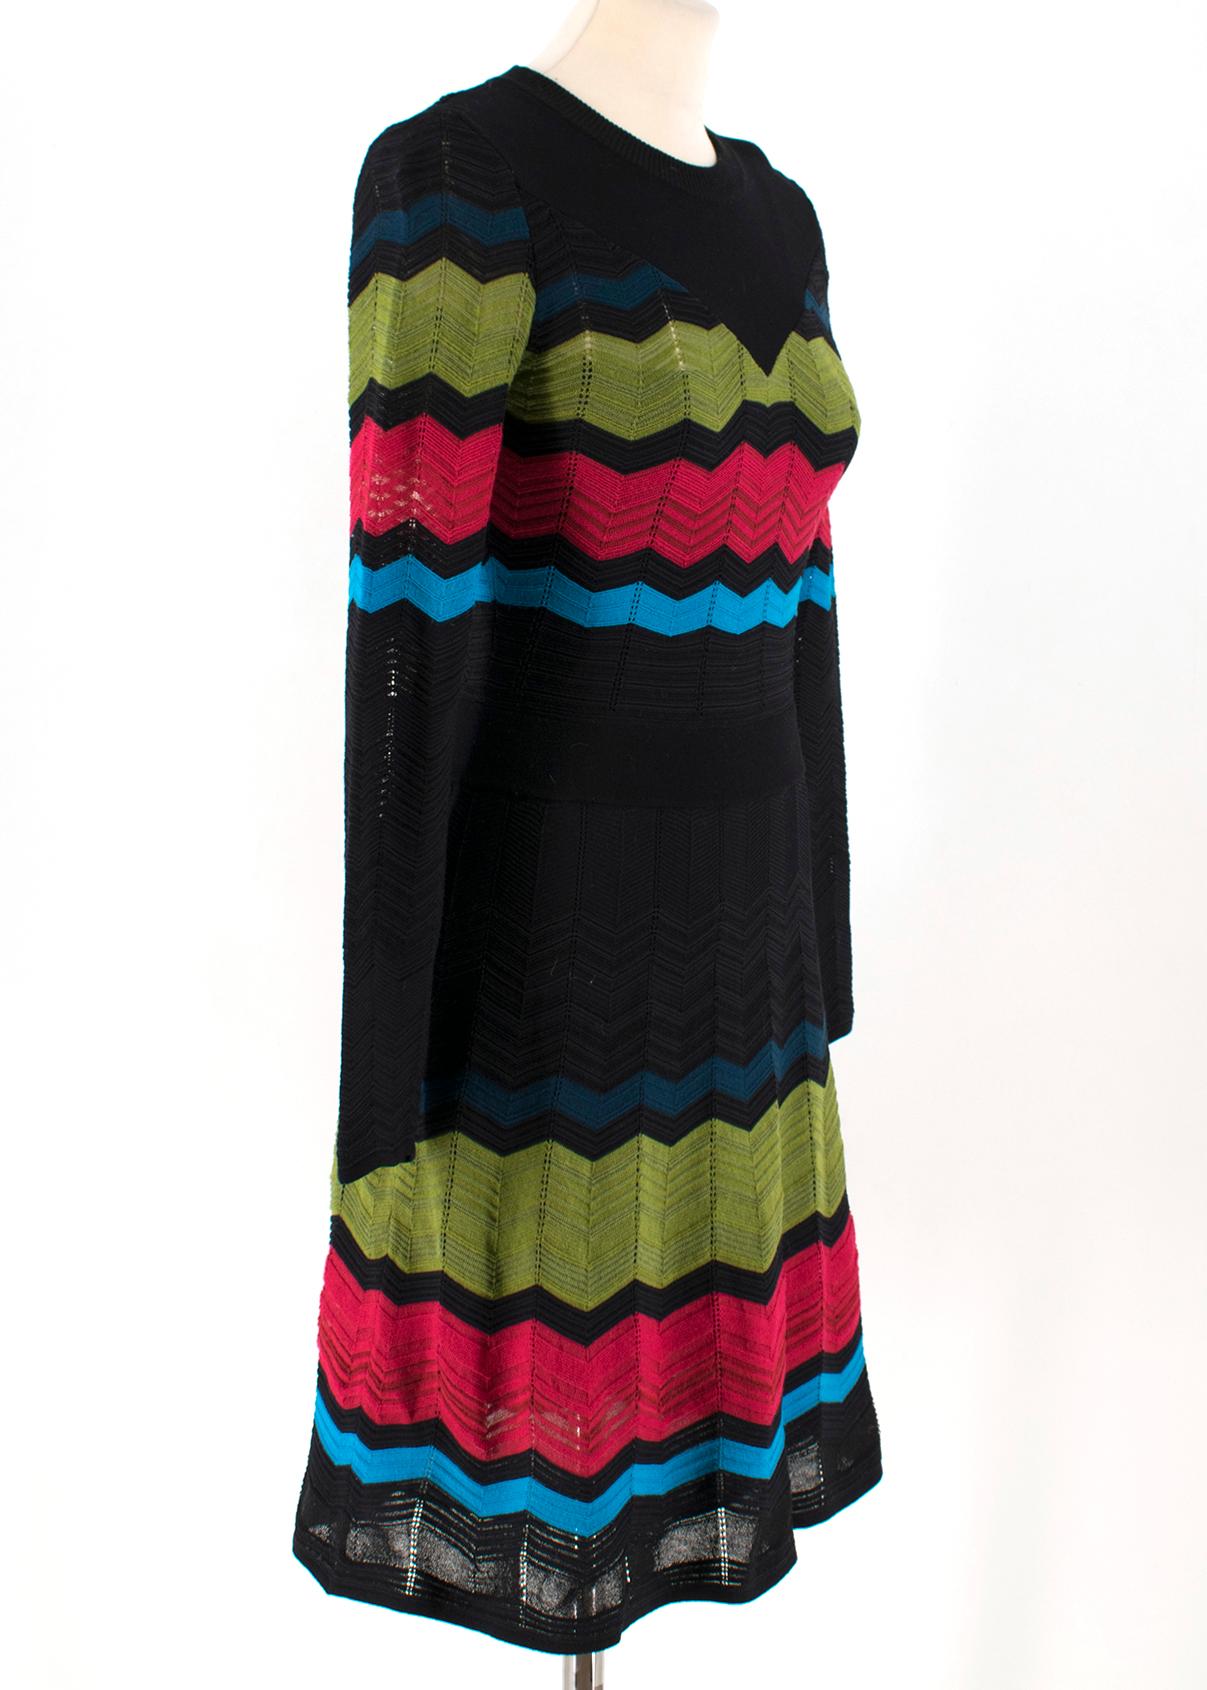 M Missoni Multicolor Knit A-line Dress 

- Multicolor A-line Dress
- Round neck, long sleeved
- Chevron knit pattern 
- Flowy skirt, fitted waist 
- Ribbed collar and waistband 
- Lined body 
- 27% Cotton, 26% Viscose, 24% Polyamide, 12% Wool